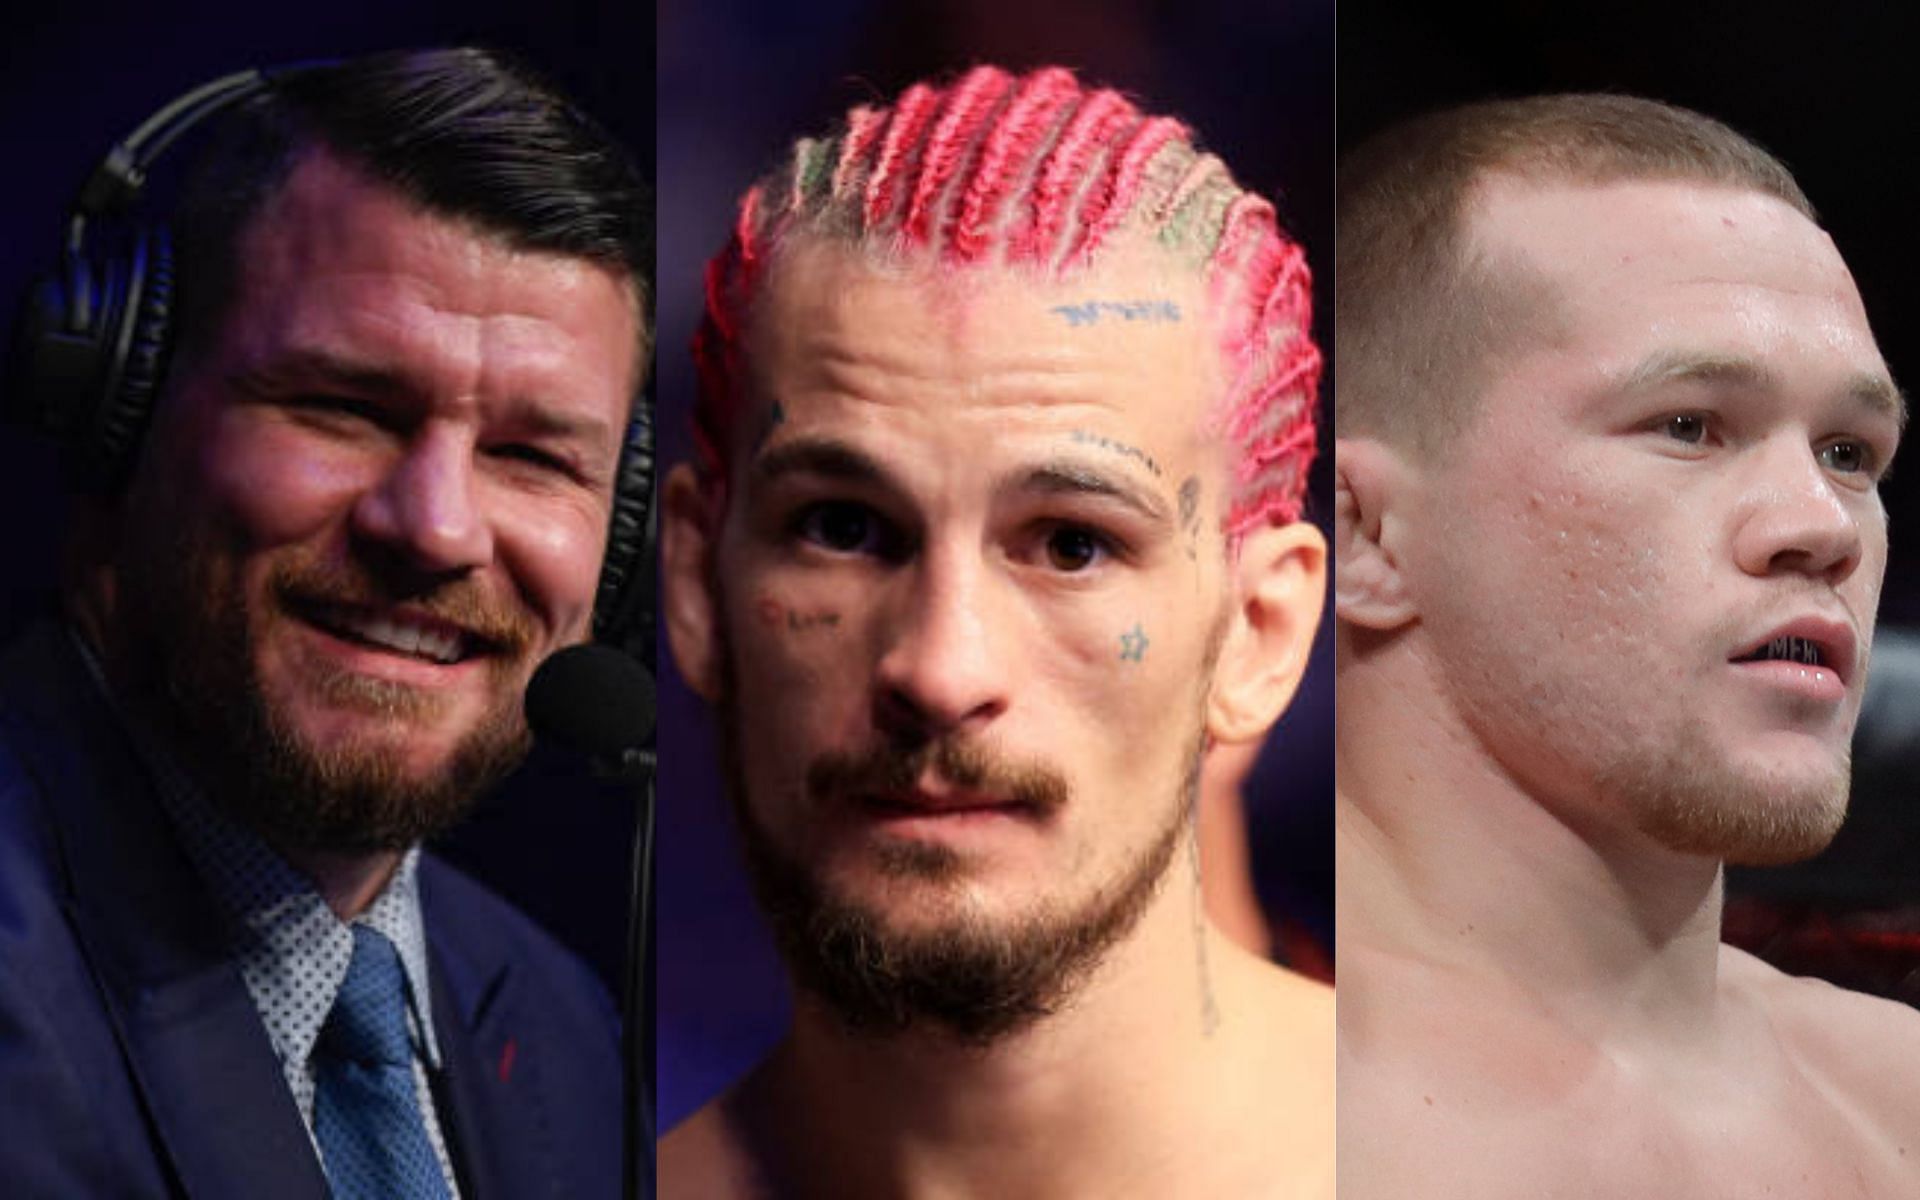 From left to right: Michael Bisping, Sean O